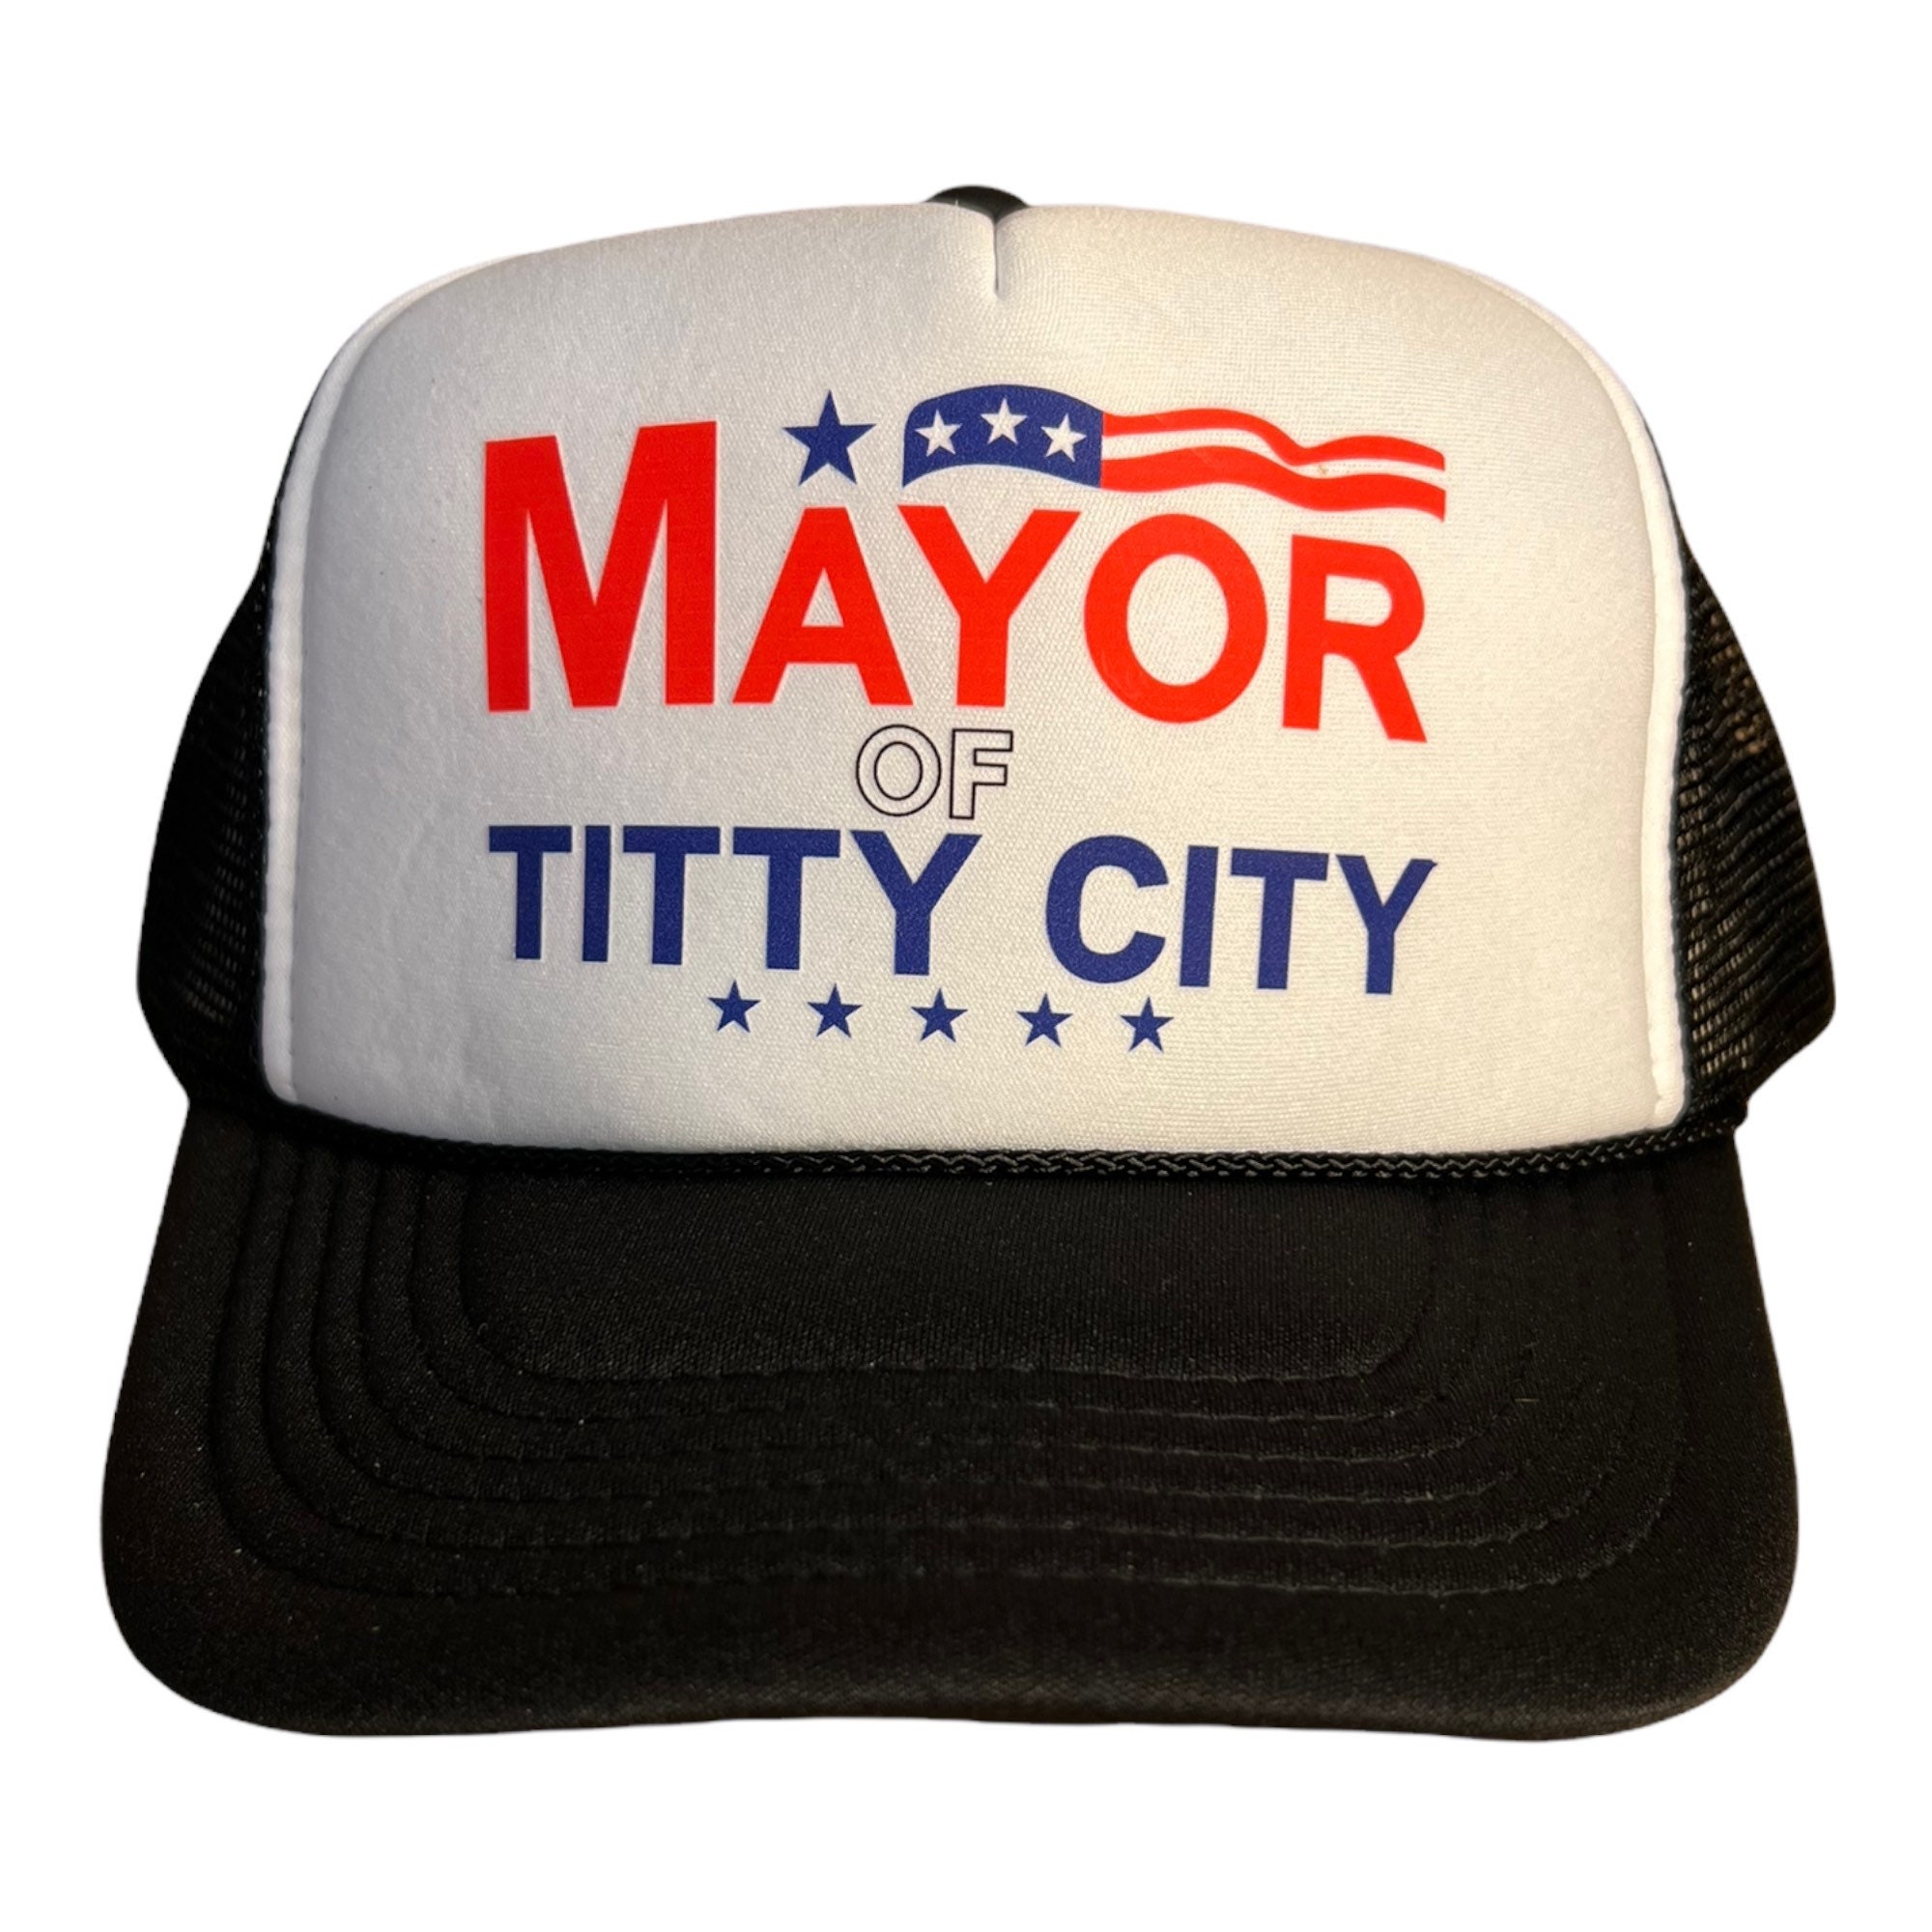 Mayor of Titty City Hat // Funny Comedy Central Hat // picture pic